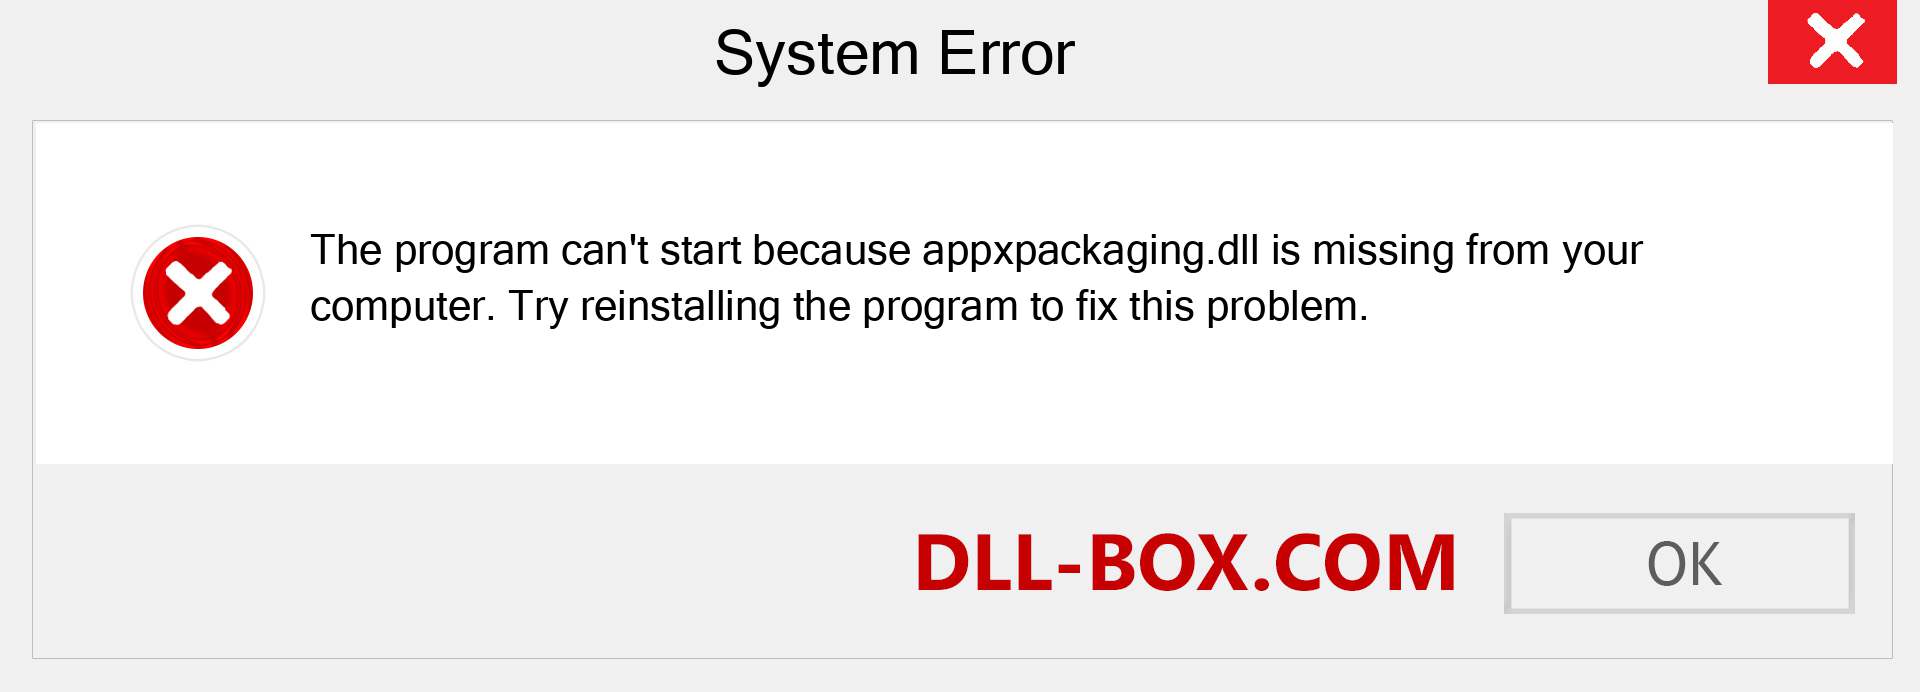  appxpackaging.dll file is missing?. Download for Windows 7, 8, 10 - Fix  appxpackaging dll Missing Error on Windows, photos, images